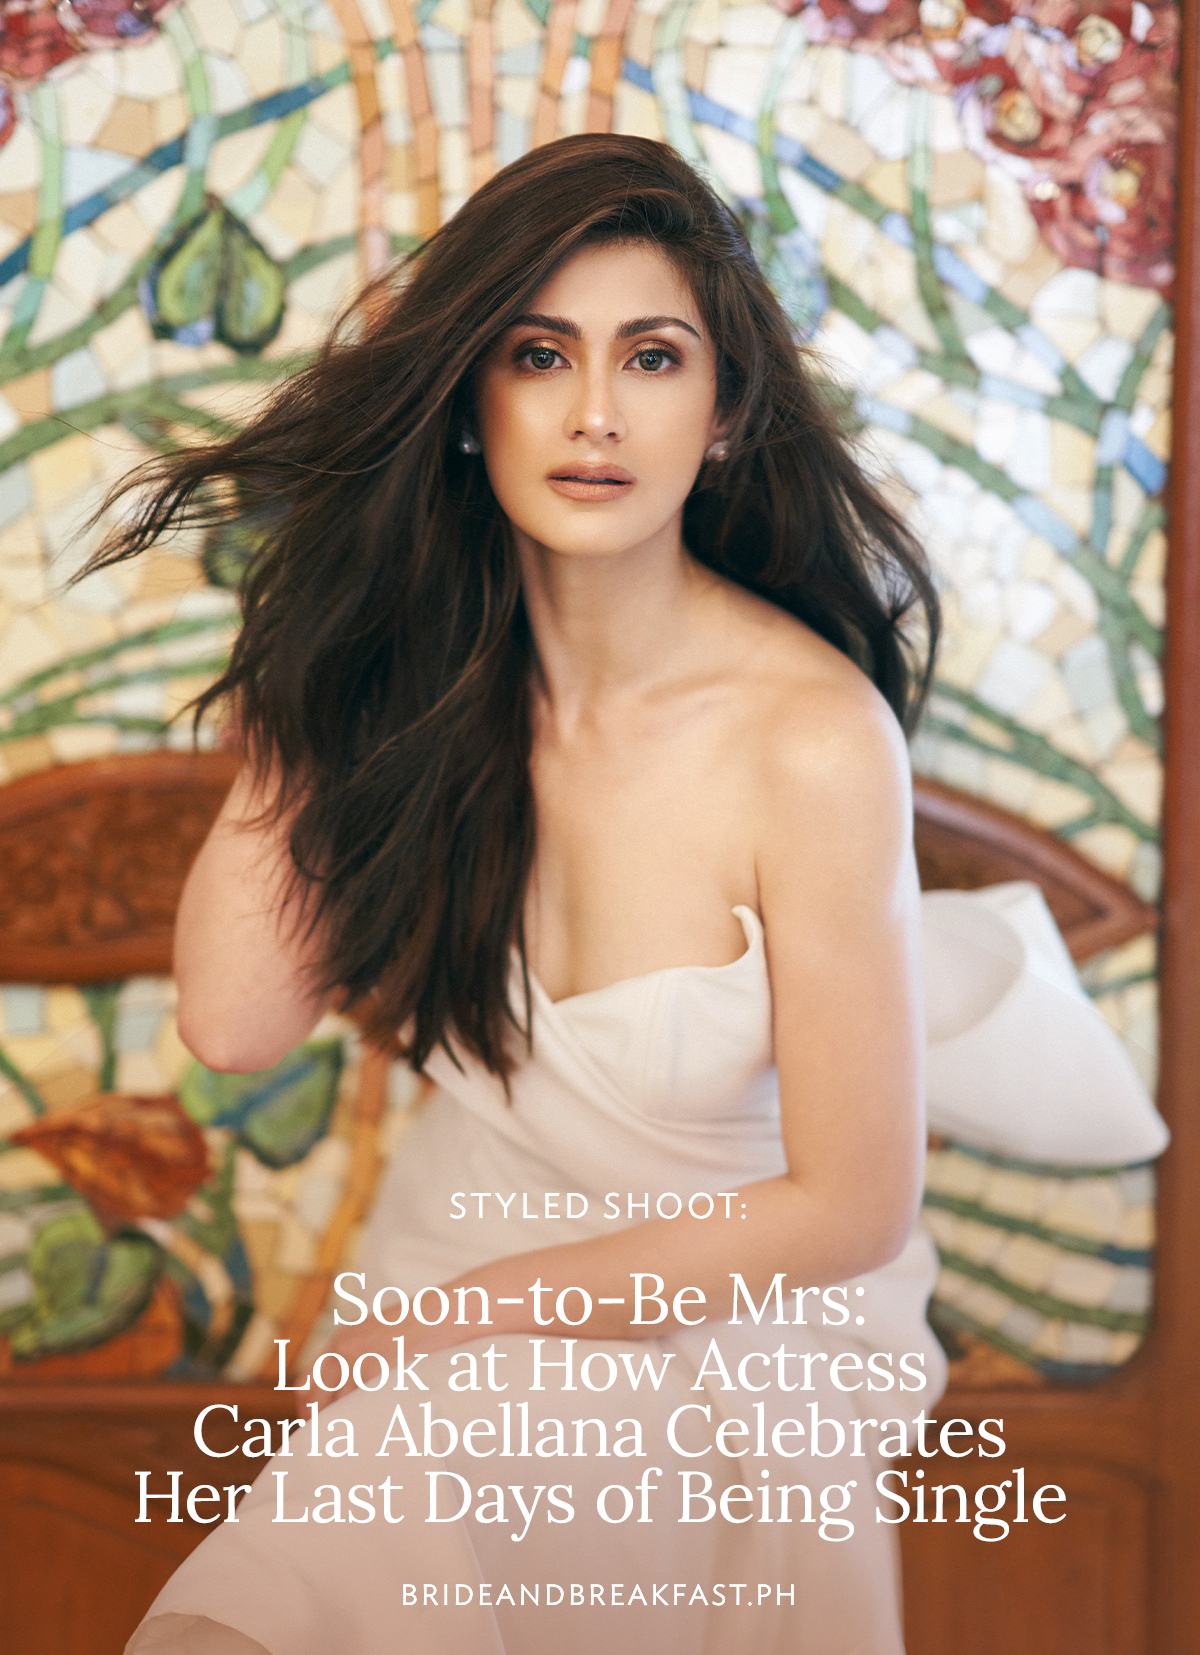 Soon-to-Be Mrs: Look at how actress Carla Abellana Celebrates Her Last Days of Being Single